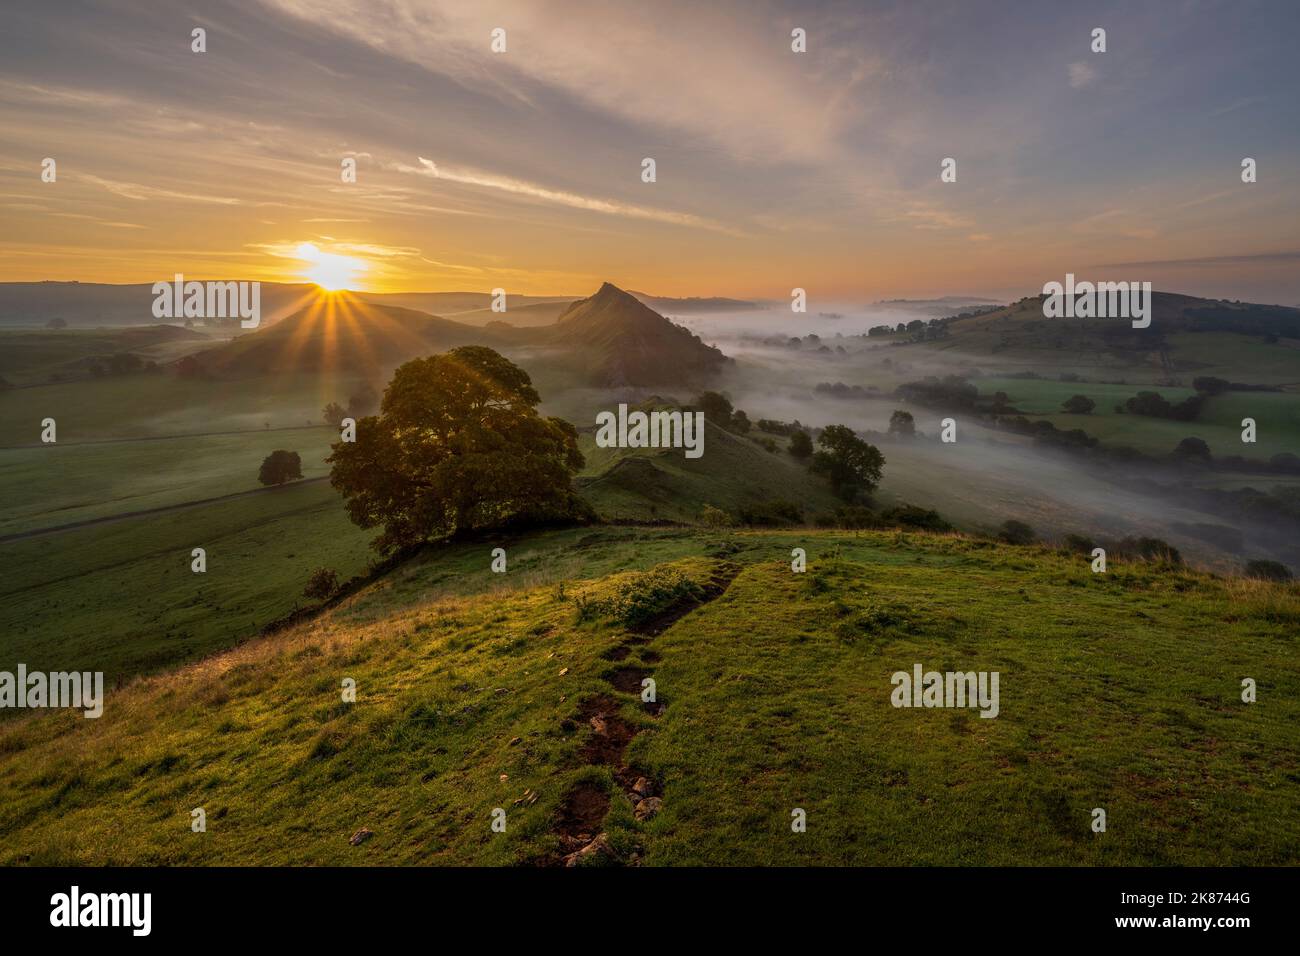 Sunrise at Chrome Hill and Parkhouse hill with low lying cloud in The Peak District, Derbyshire, England, United Kingdom, Europe Stock Photo